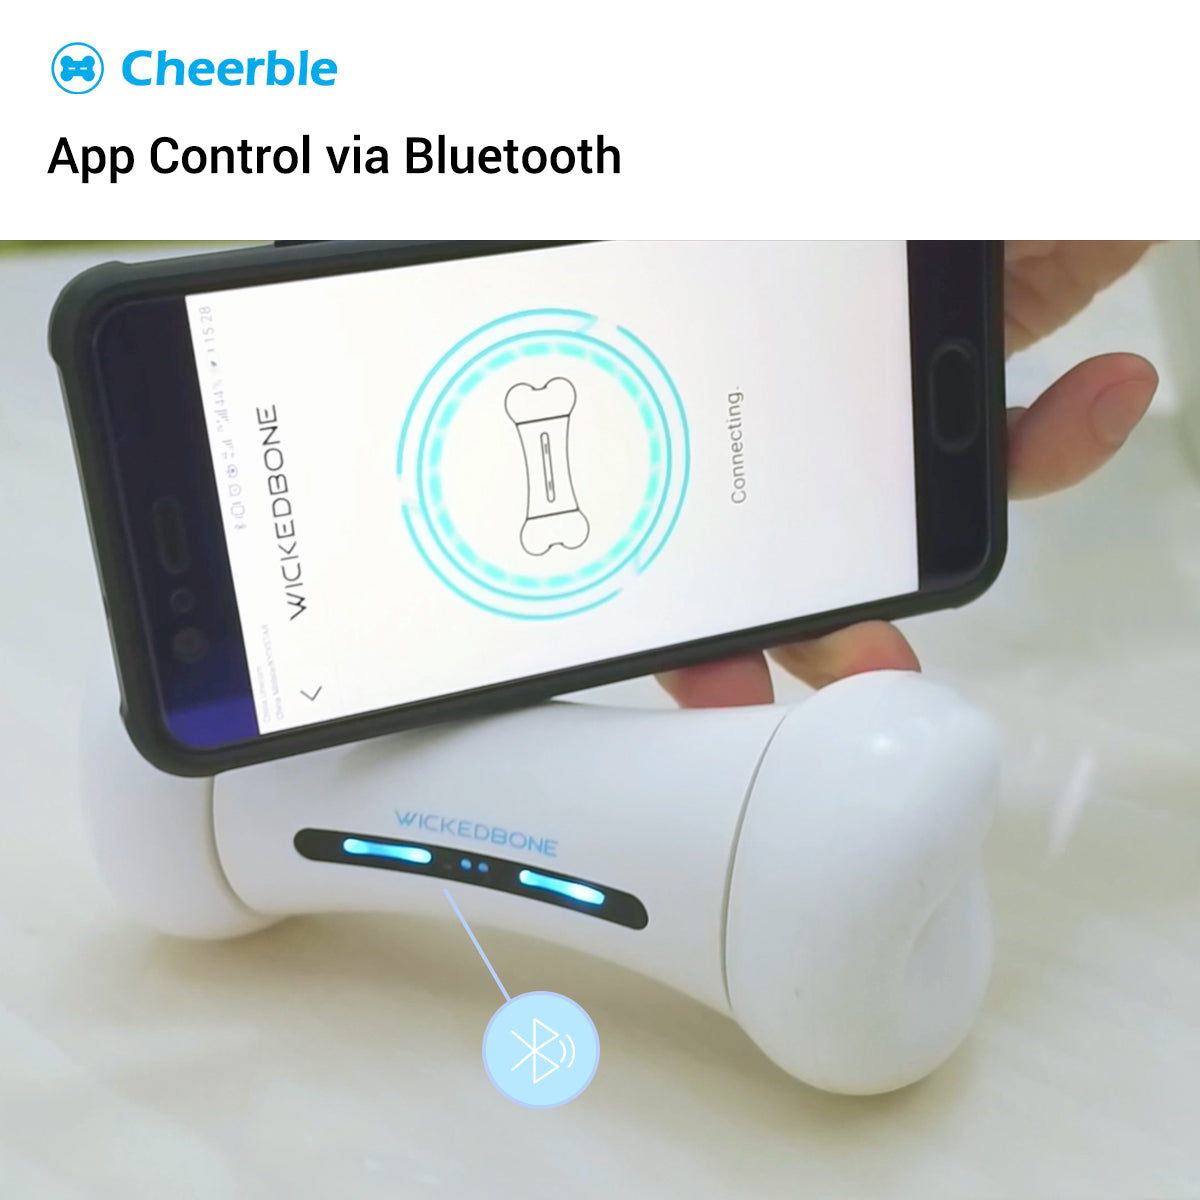 Cheerble's Wickedbone is a fun smart dog toy with a mind of its